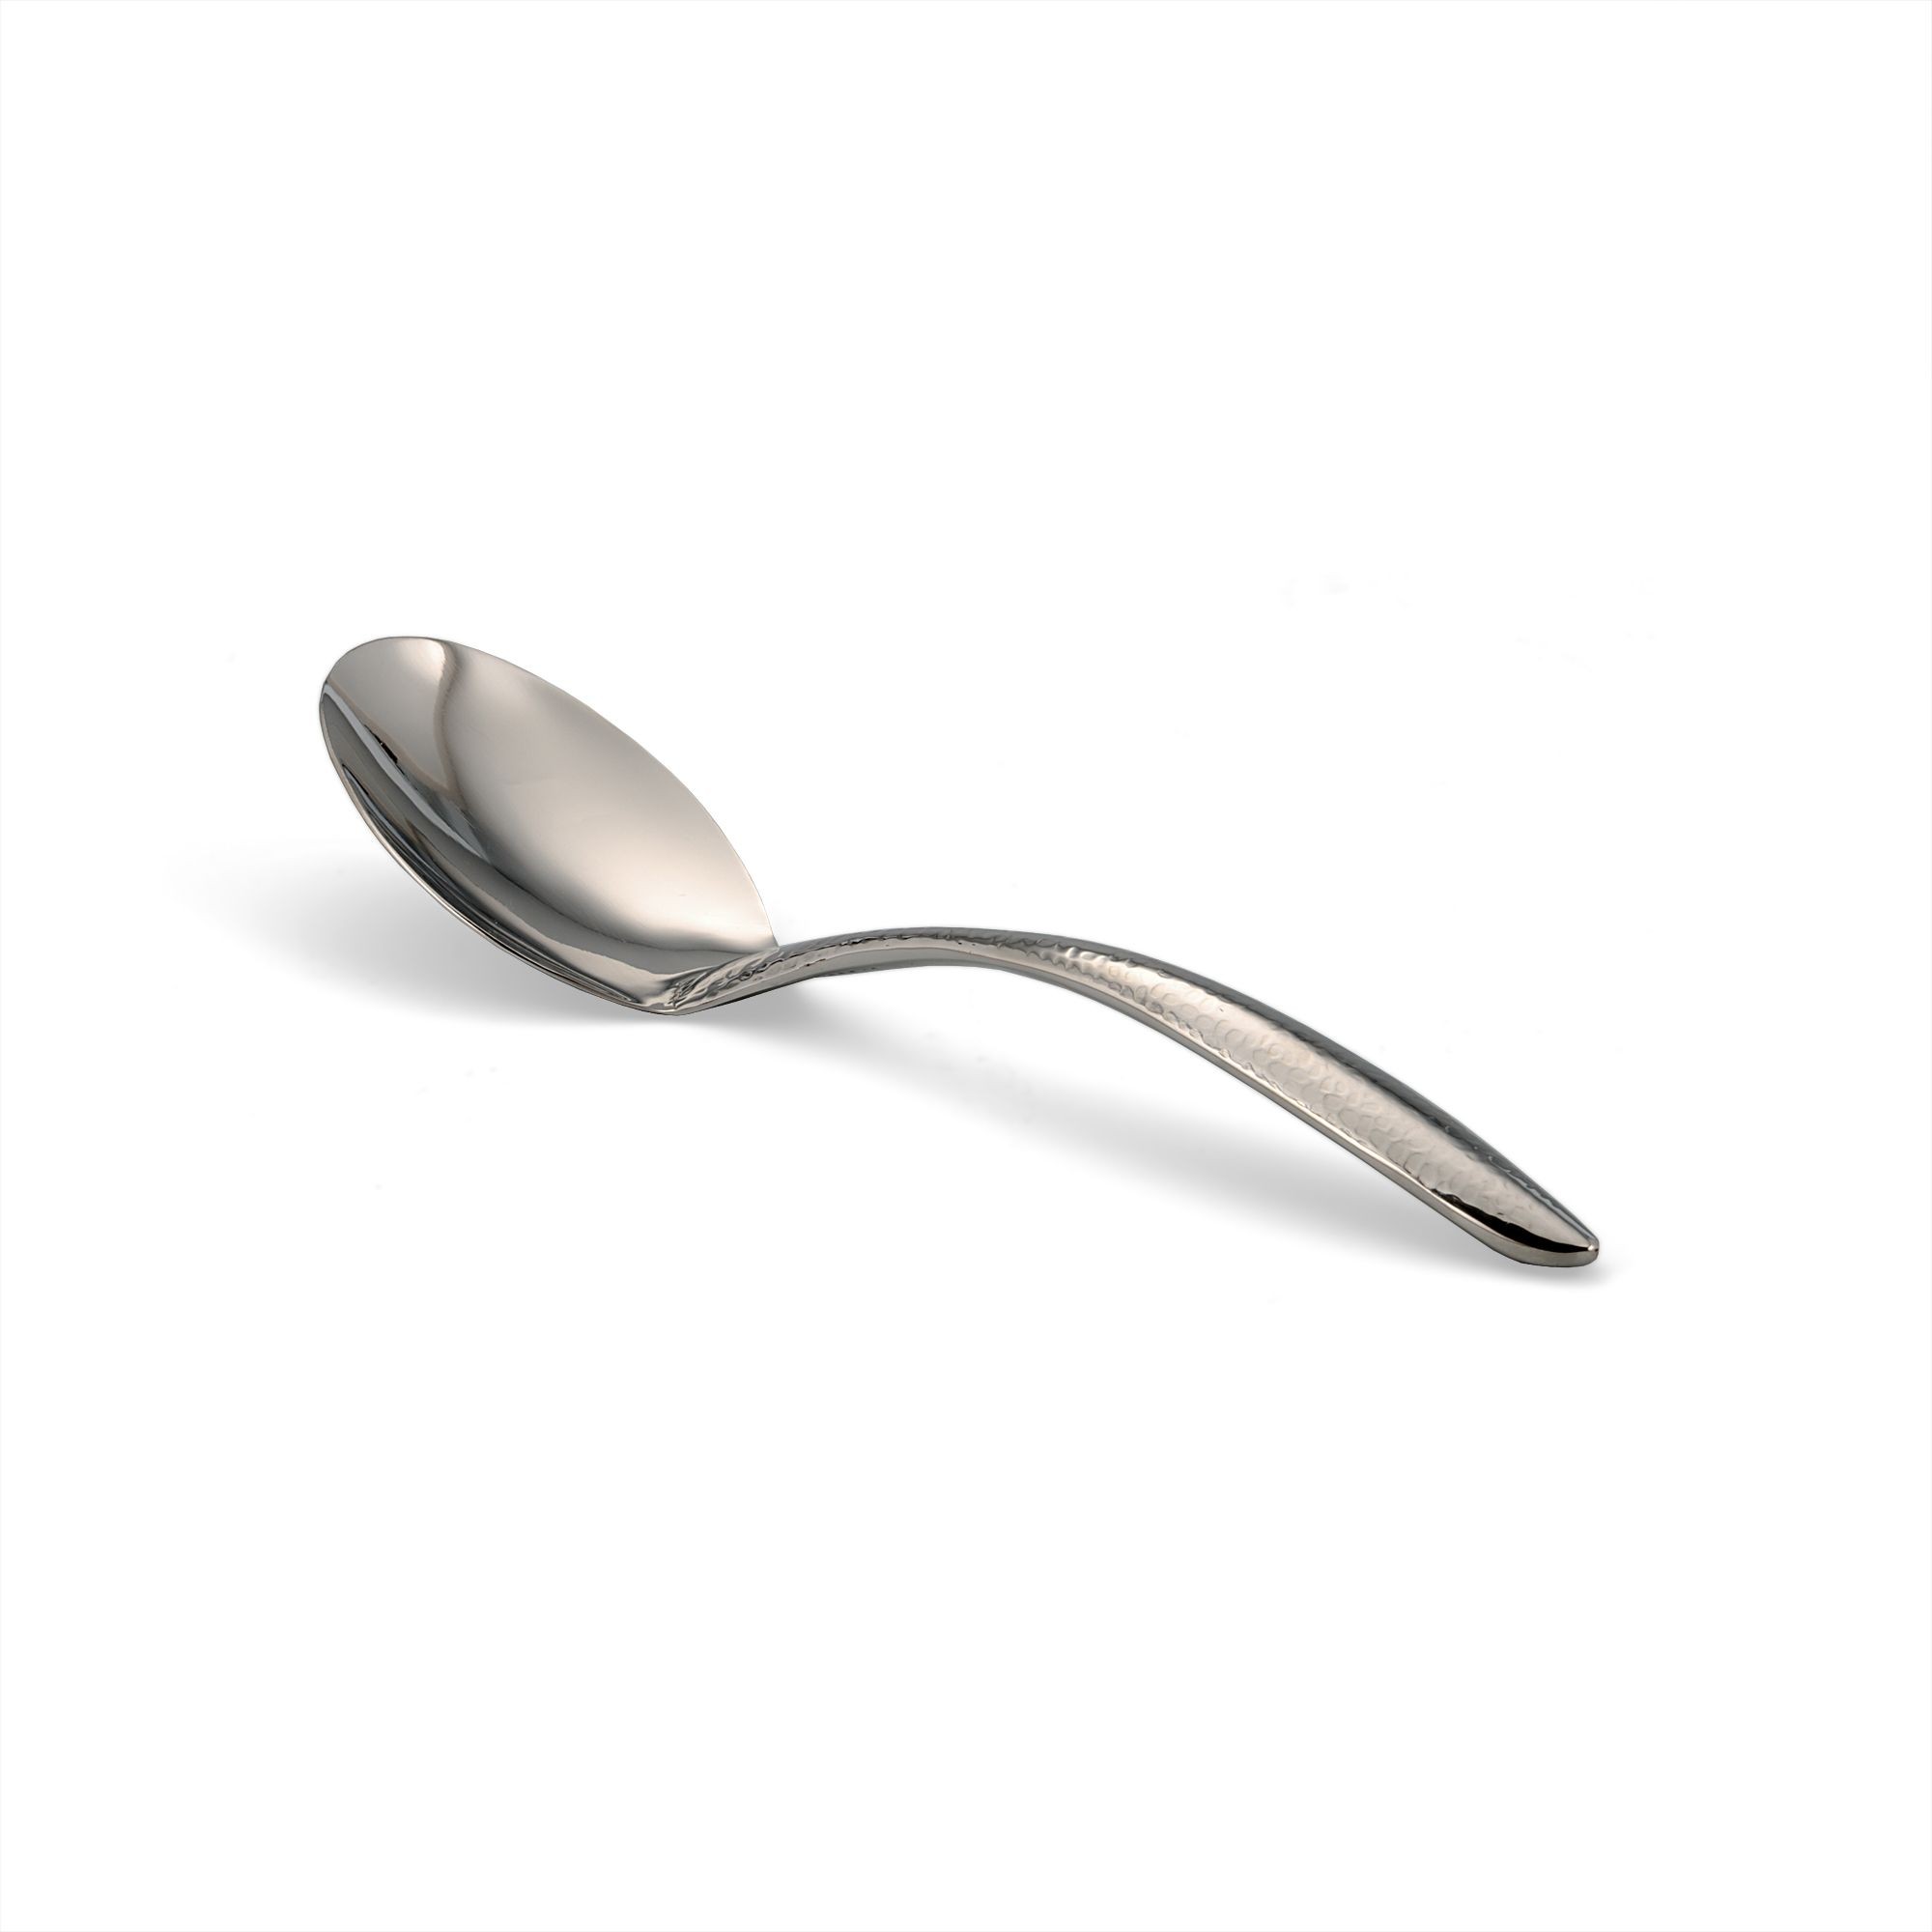 Bon Chef 9643HF EZ Use Banquet Serving Solid Spoon with Hammered Finish, 9 3/4"